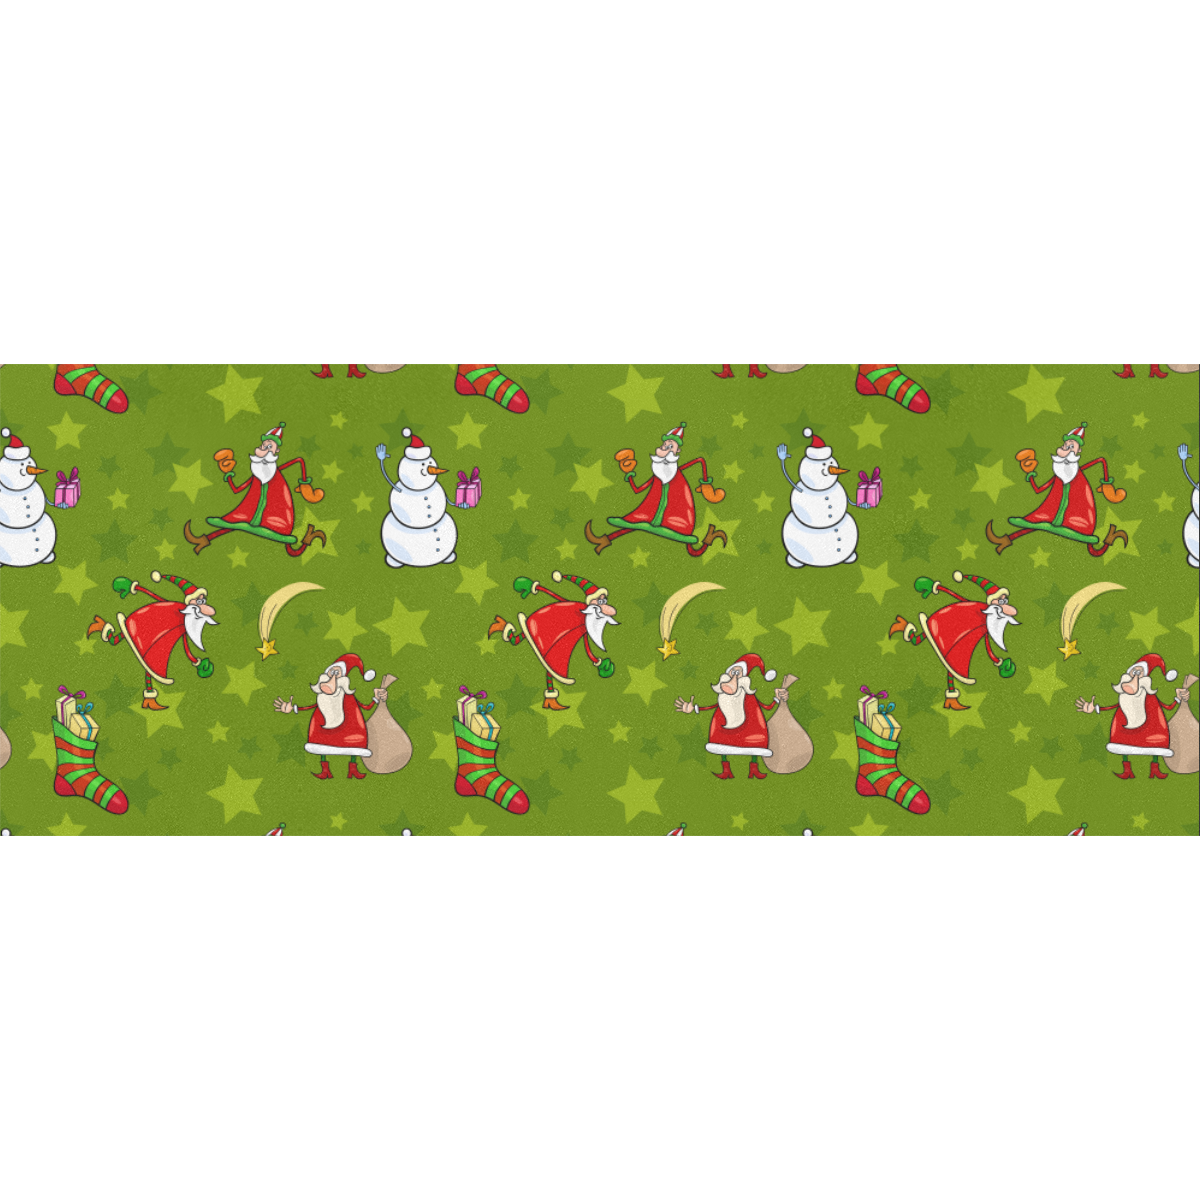 Funny Christmas Santa Claus Snowman Pattern Gift Wrapping Paper 58"x 23" (1 Roll)